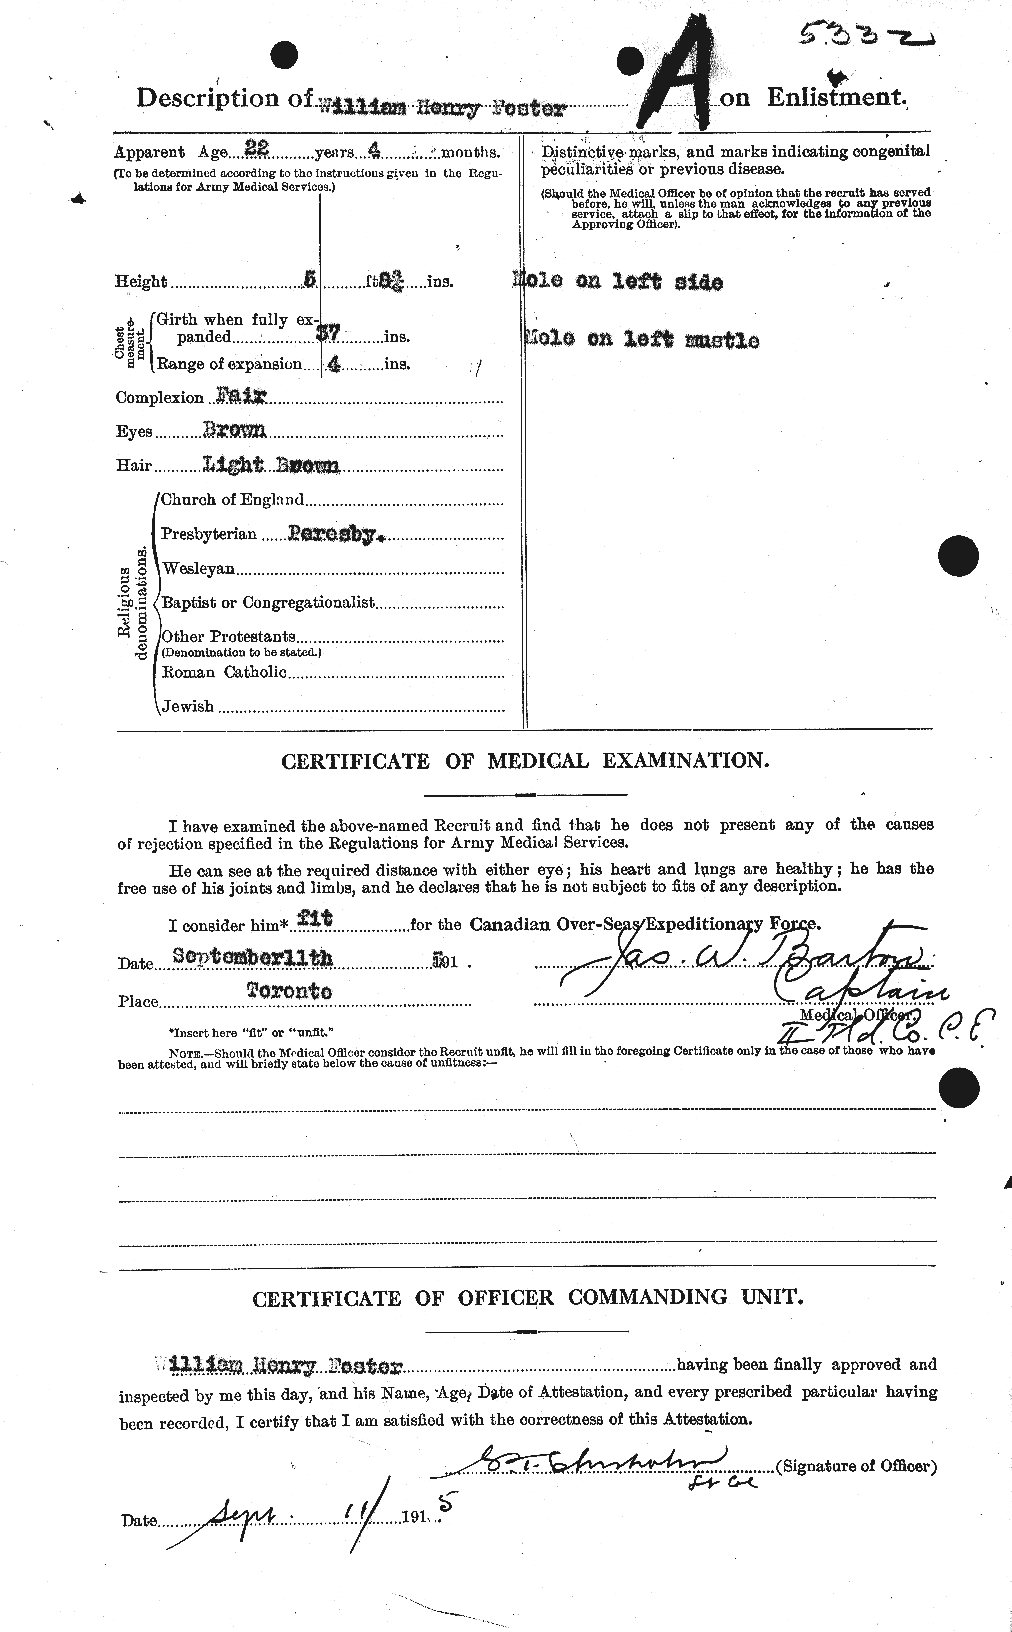 Personnel Records of the First World War - CEF 328754b